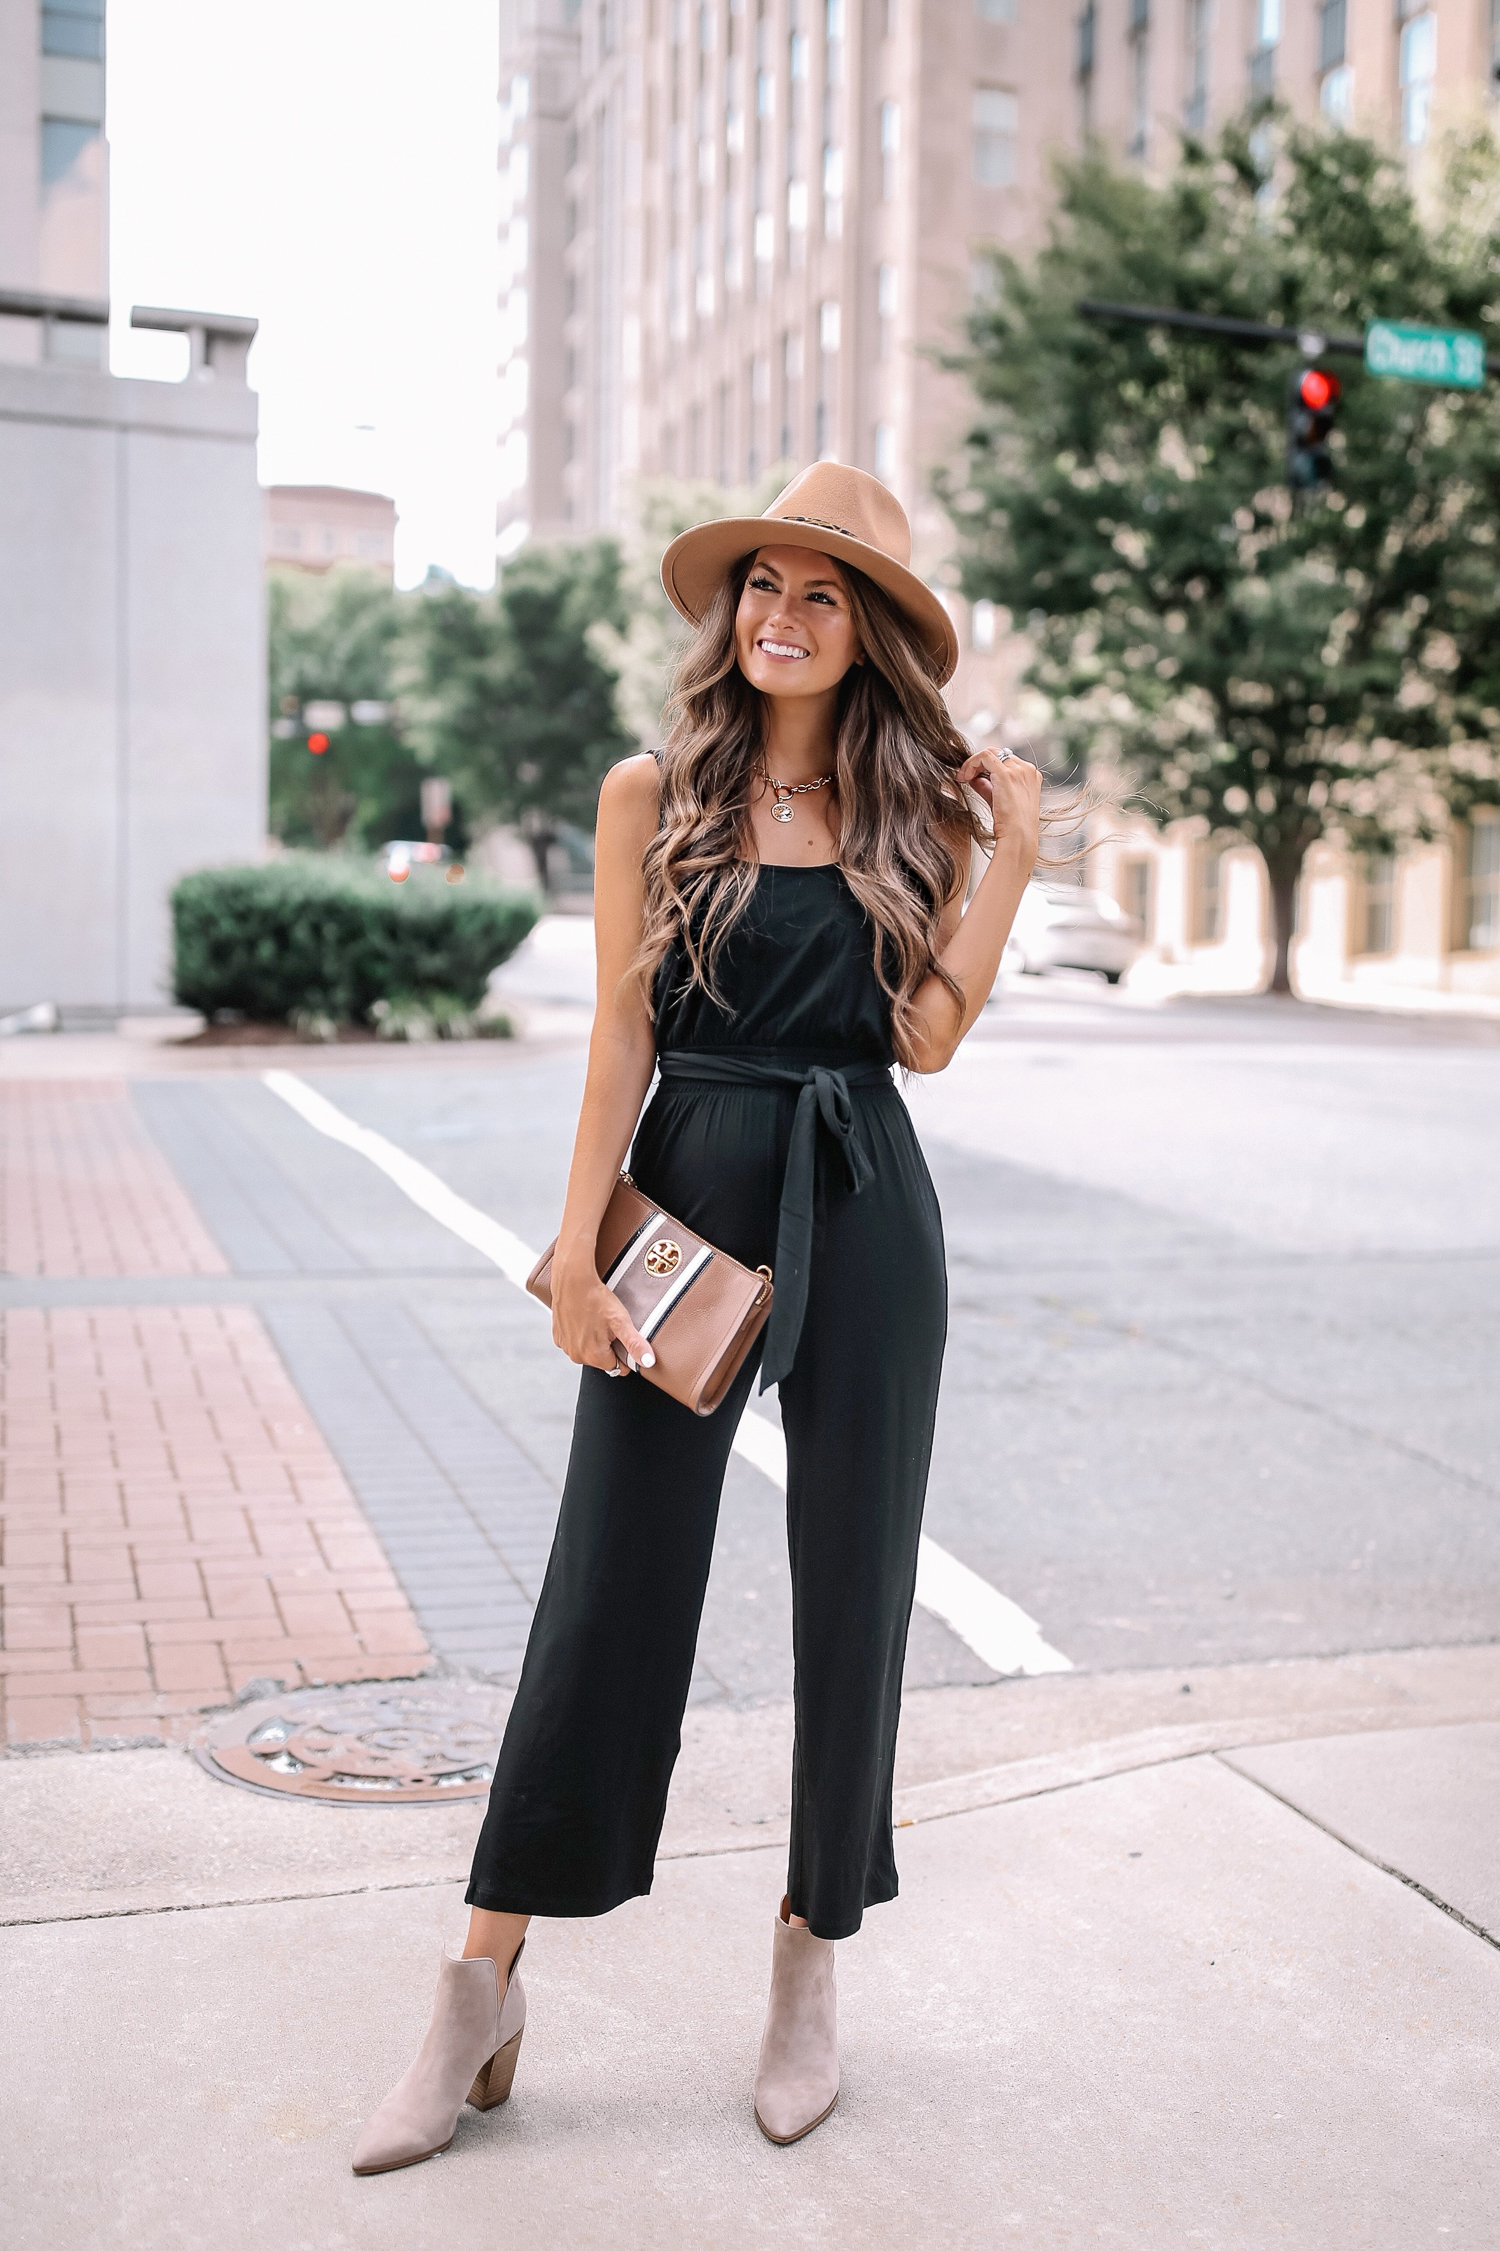 Black Jumpsuit Outfits (128 ideas & outfits)